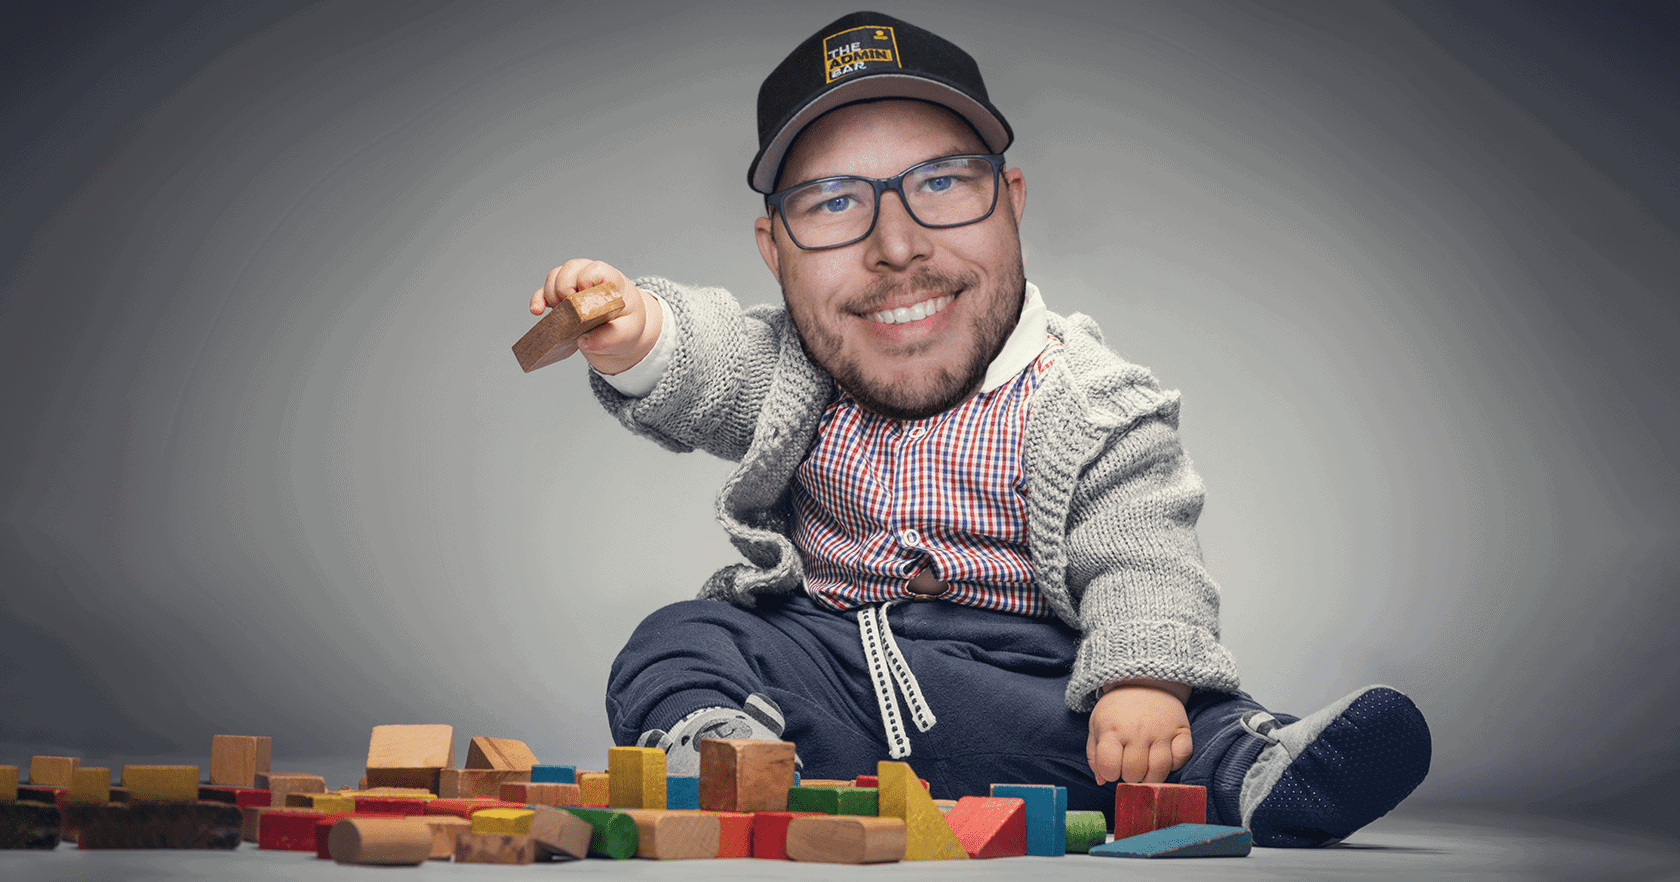 a baby sitting up playing with blocks with Kyle Van Deusen's head superimposed on the baby